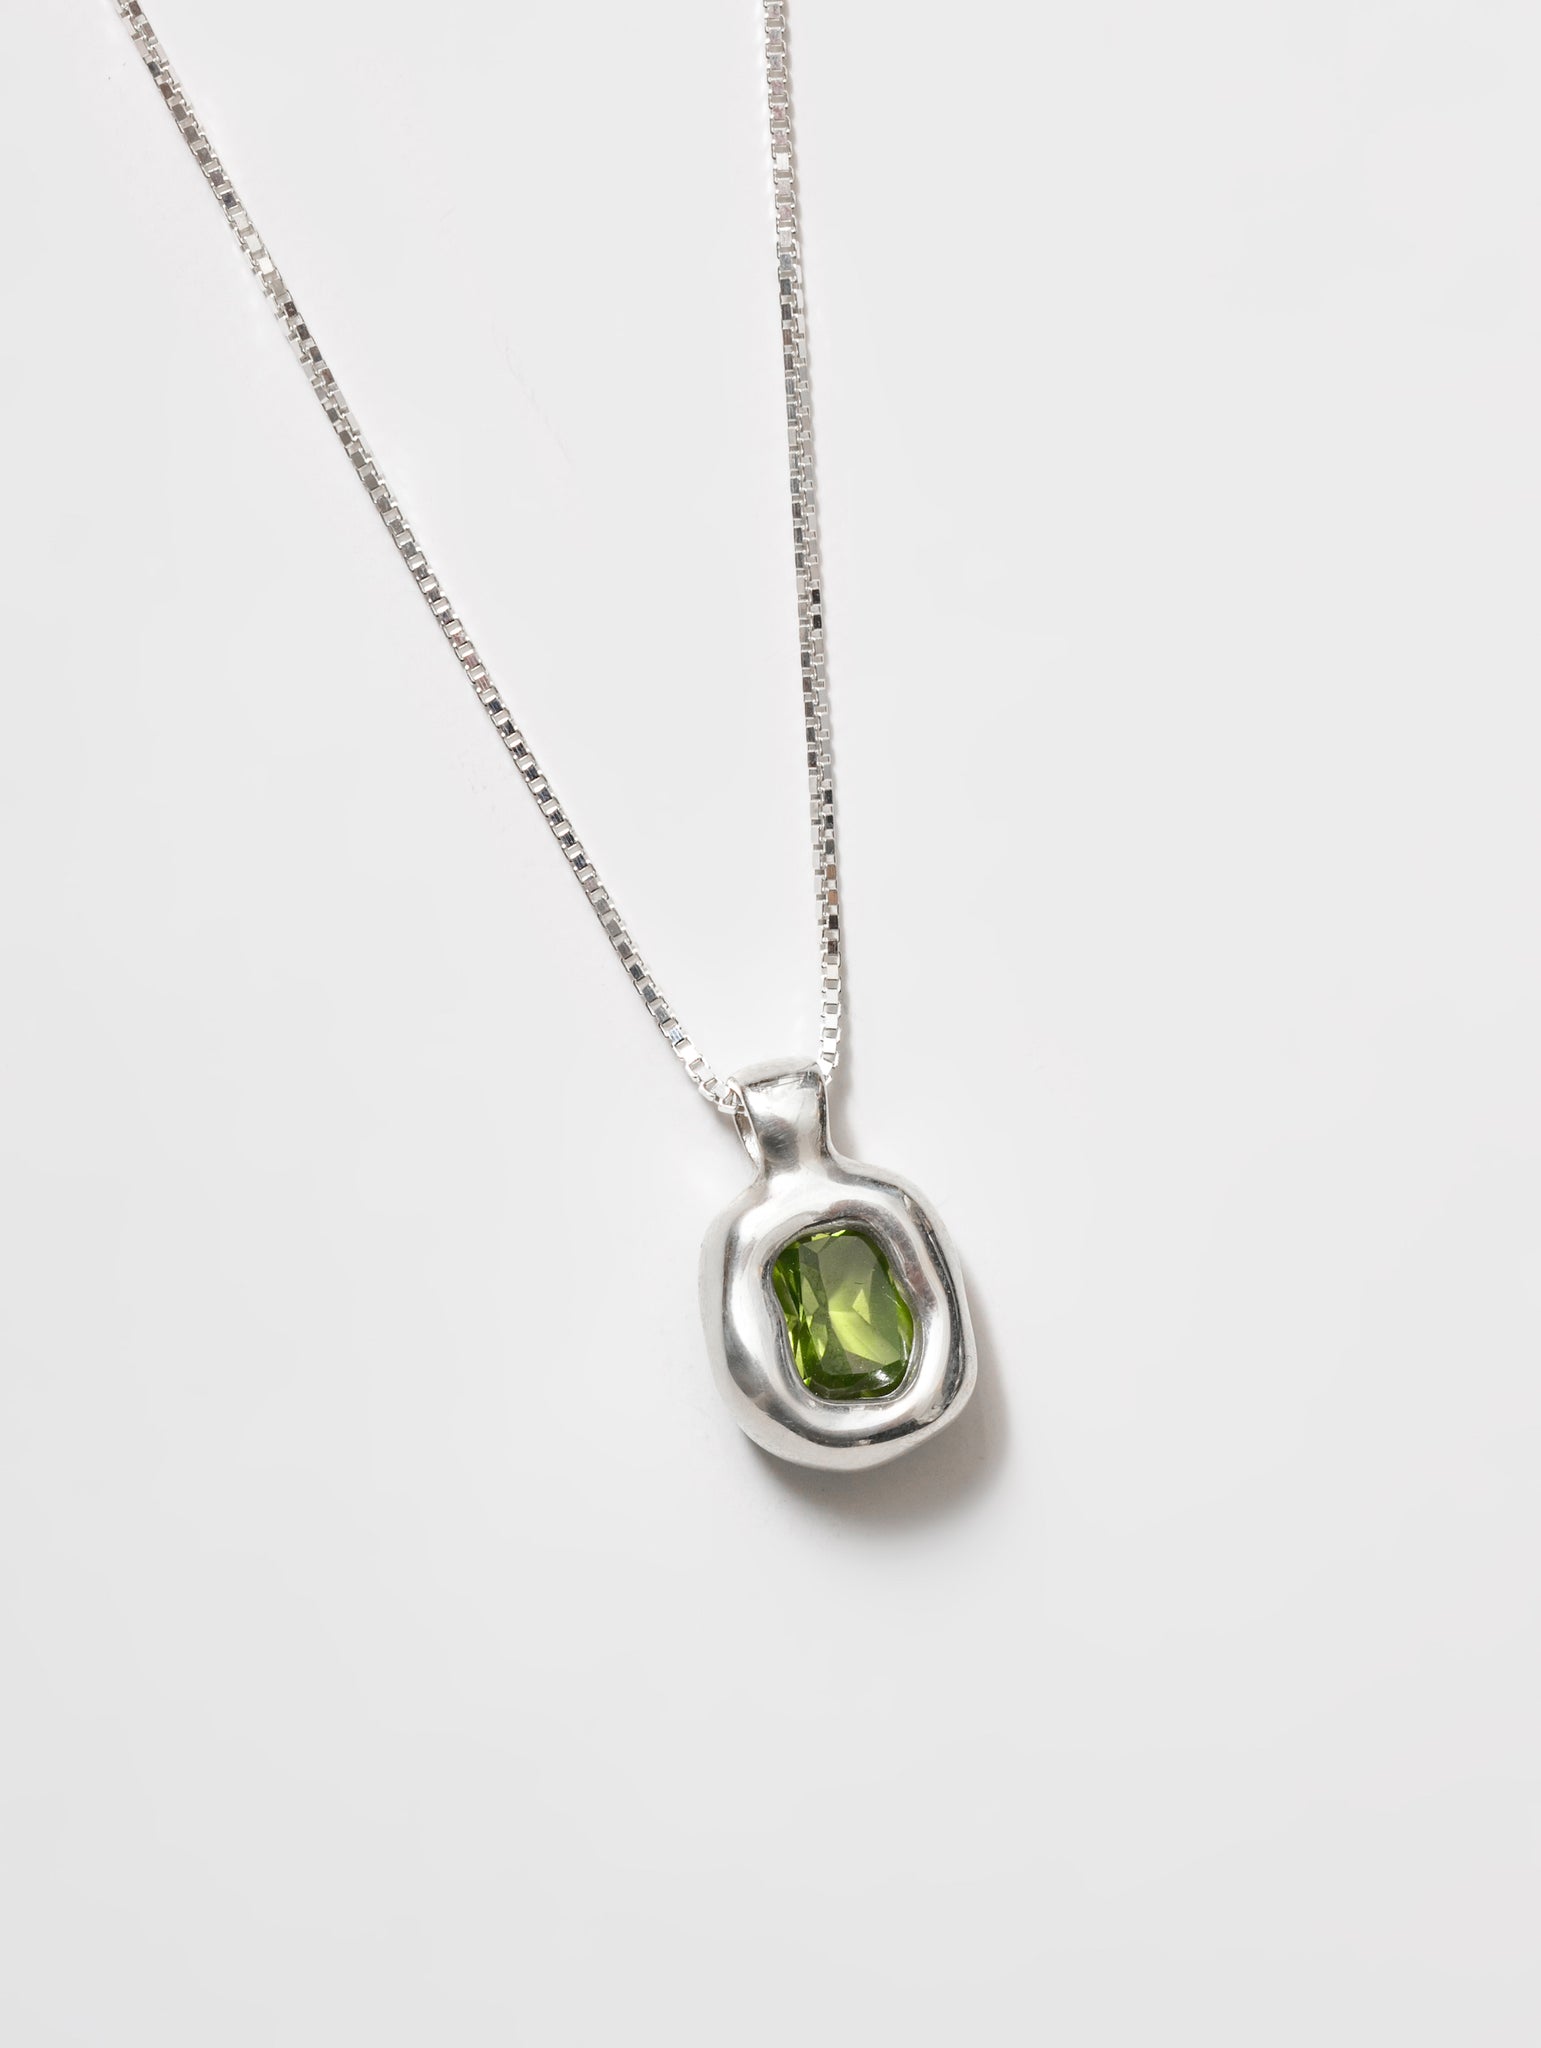 Freya Necklace in Green and Sterling Silver